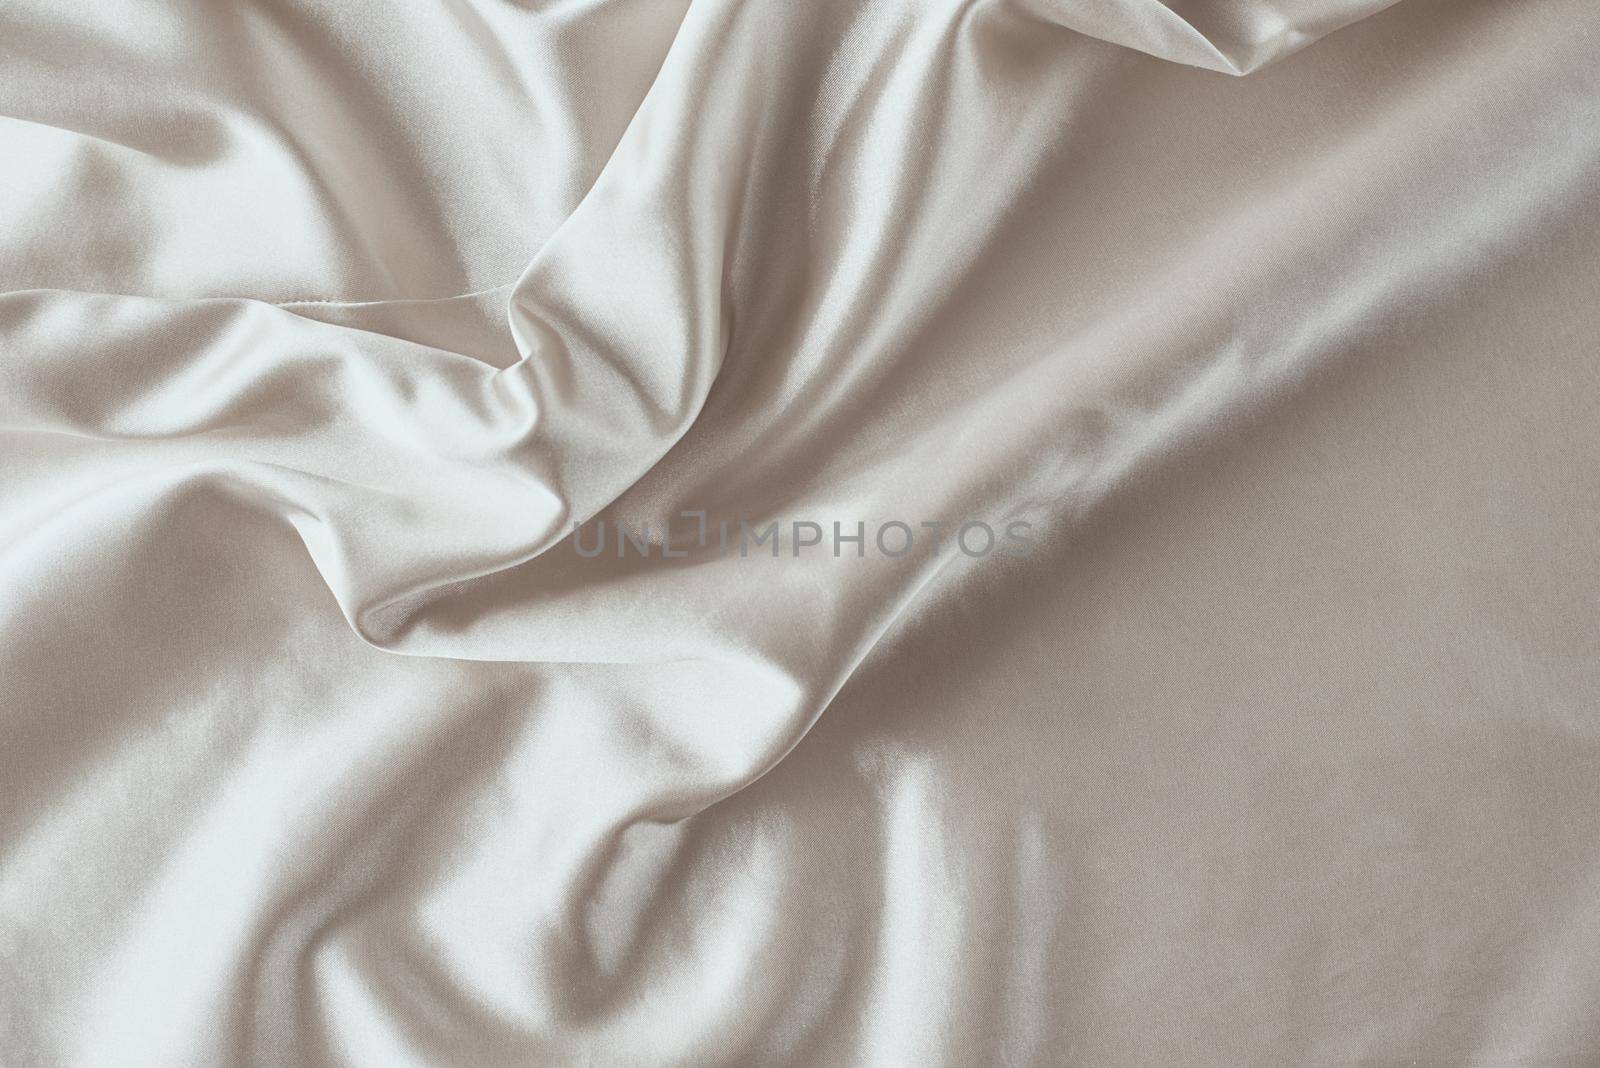 Golden light silk background with folds. Abstract texture of rippled satin surface